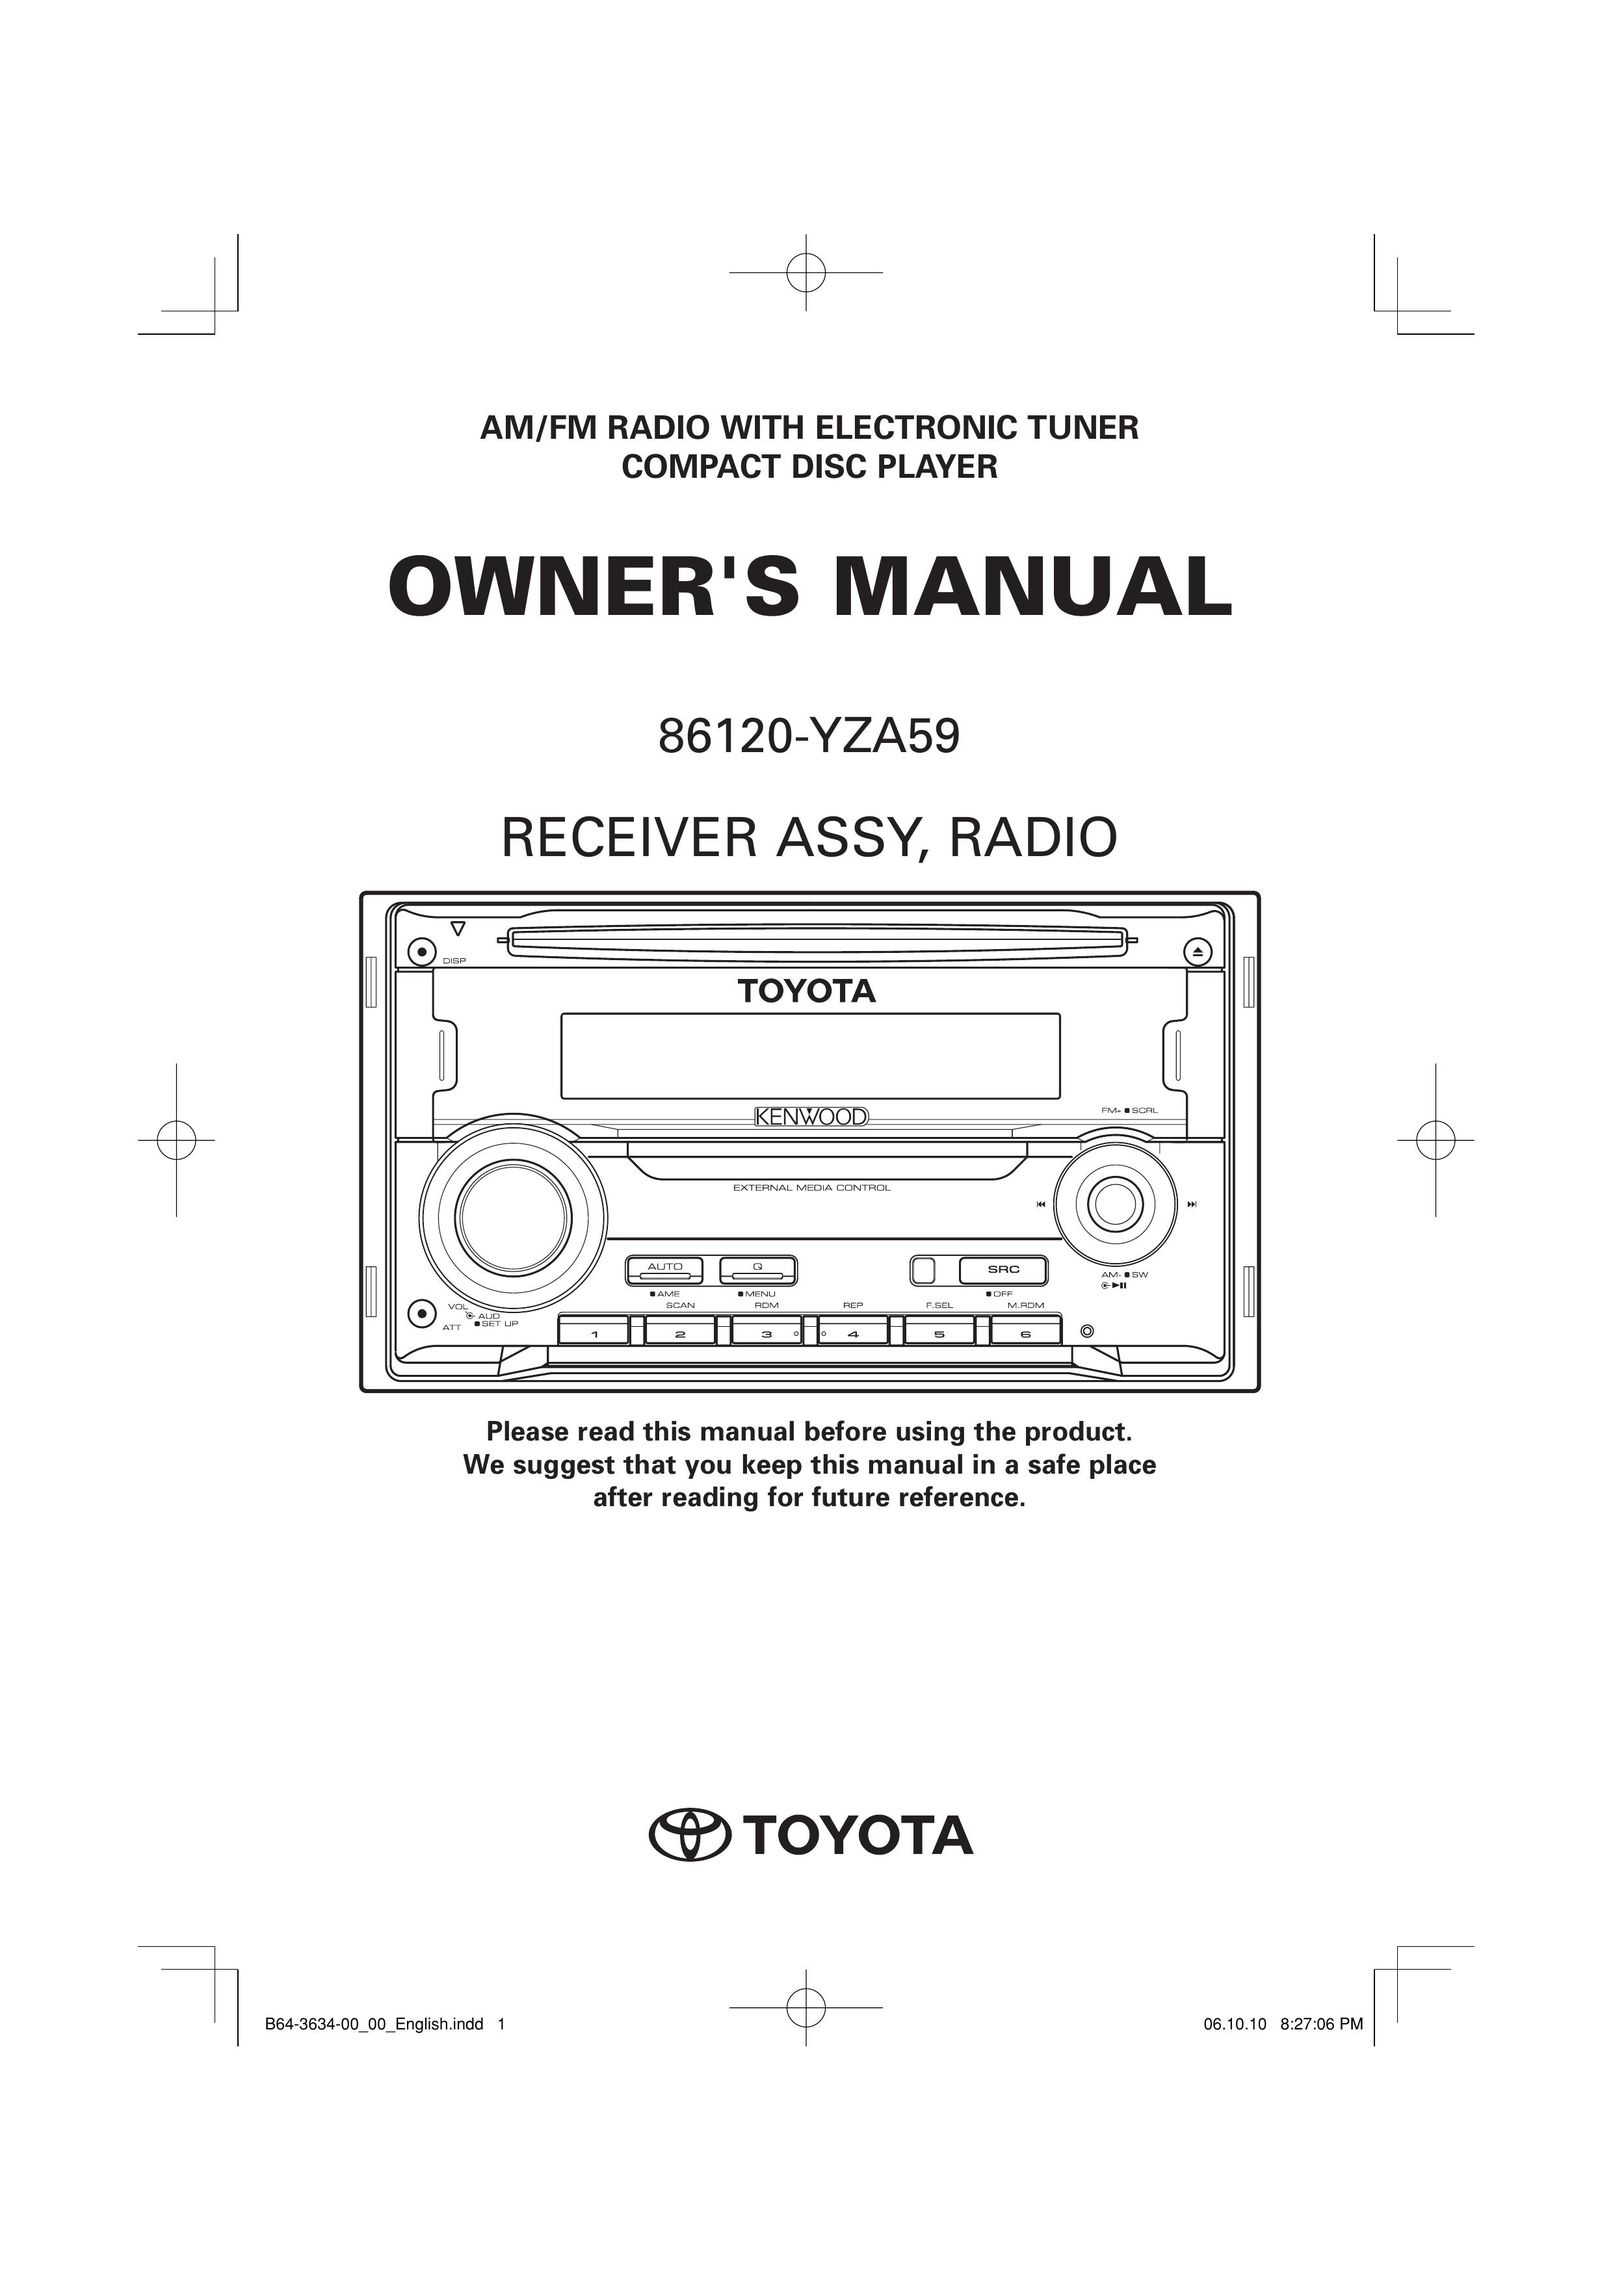 Toyota 86120-YZA59 Car Stereo System User Manual